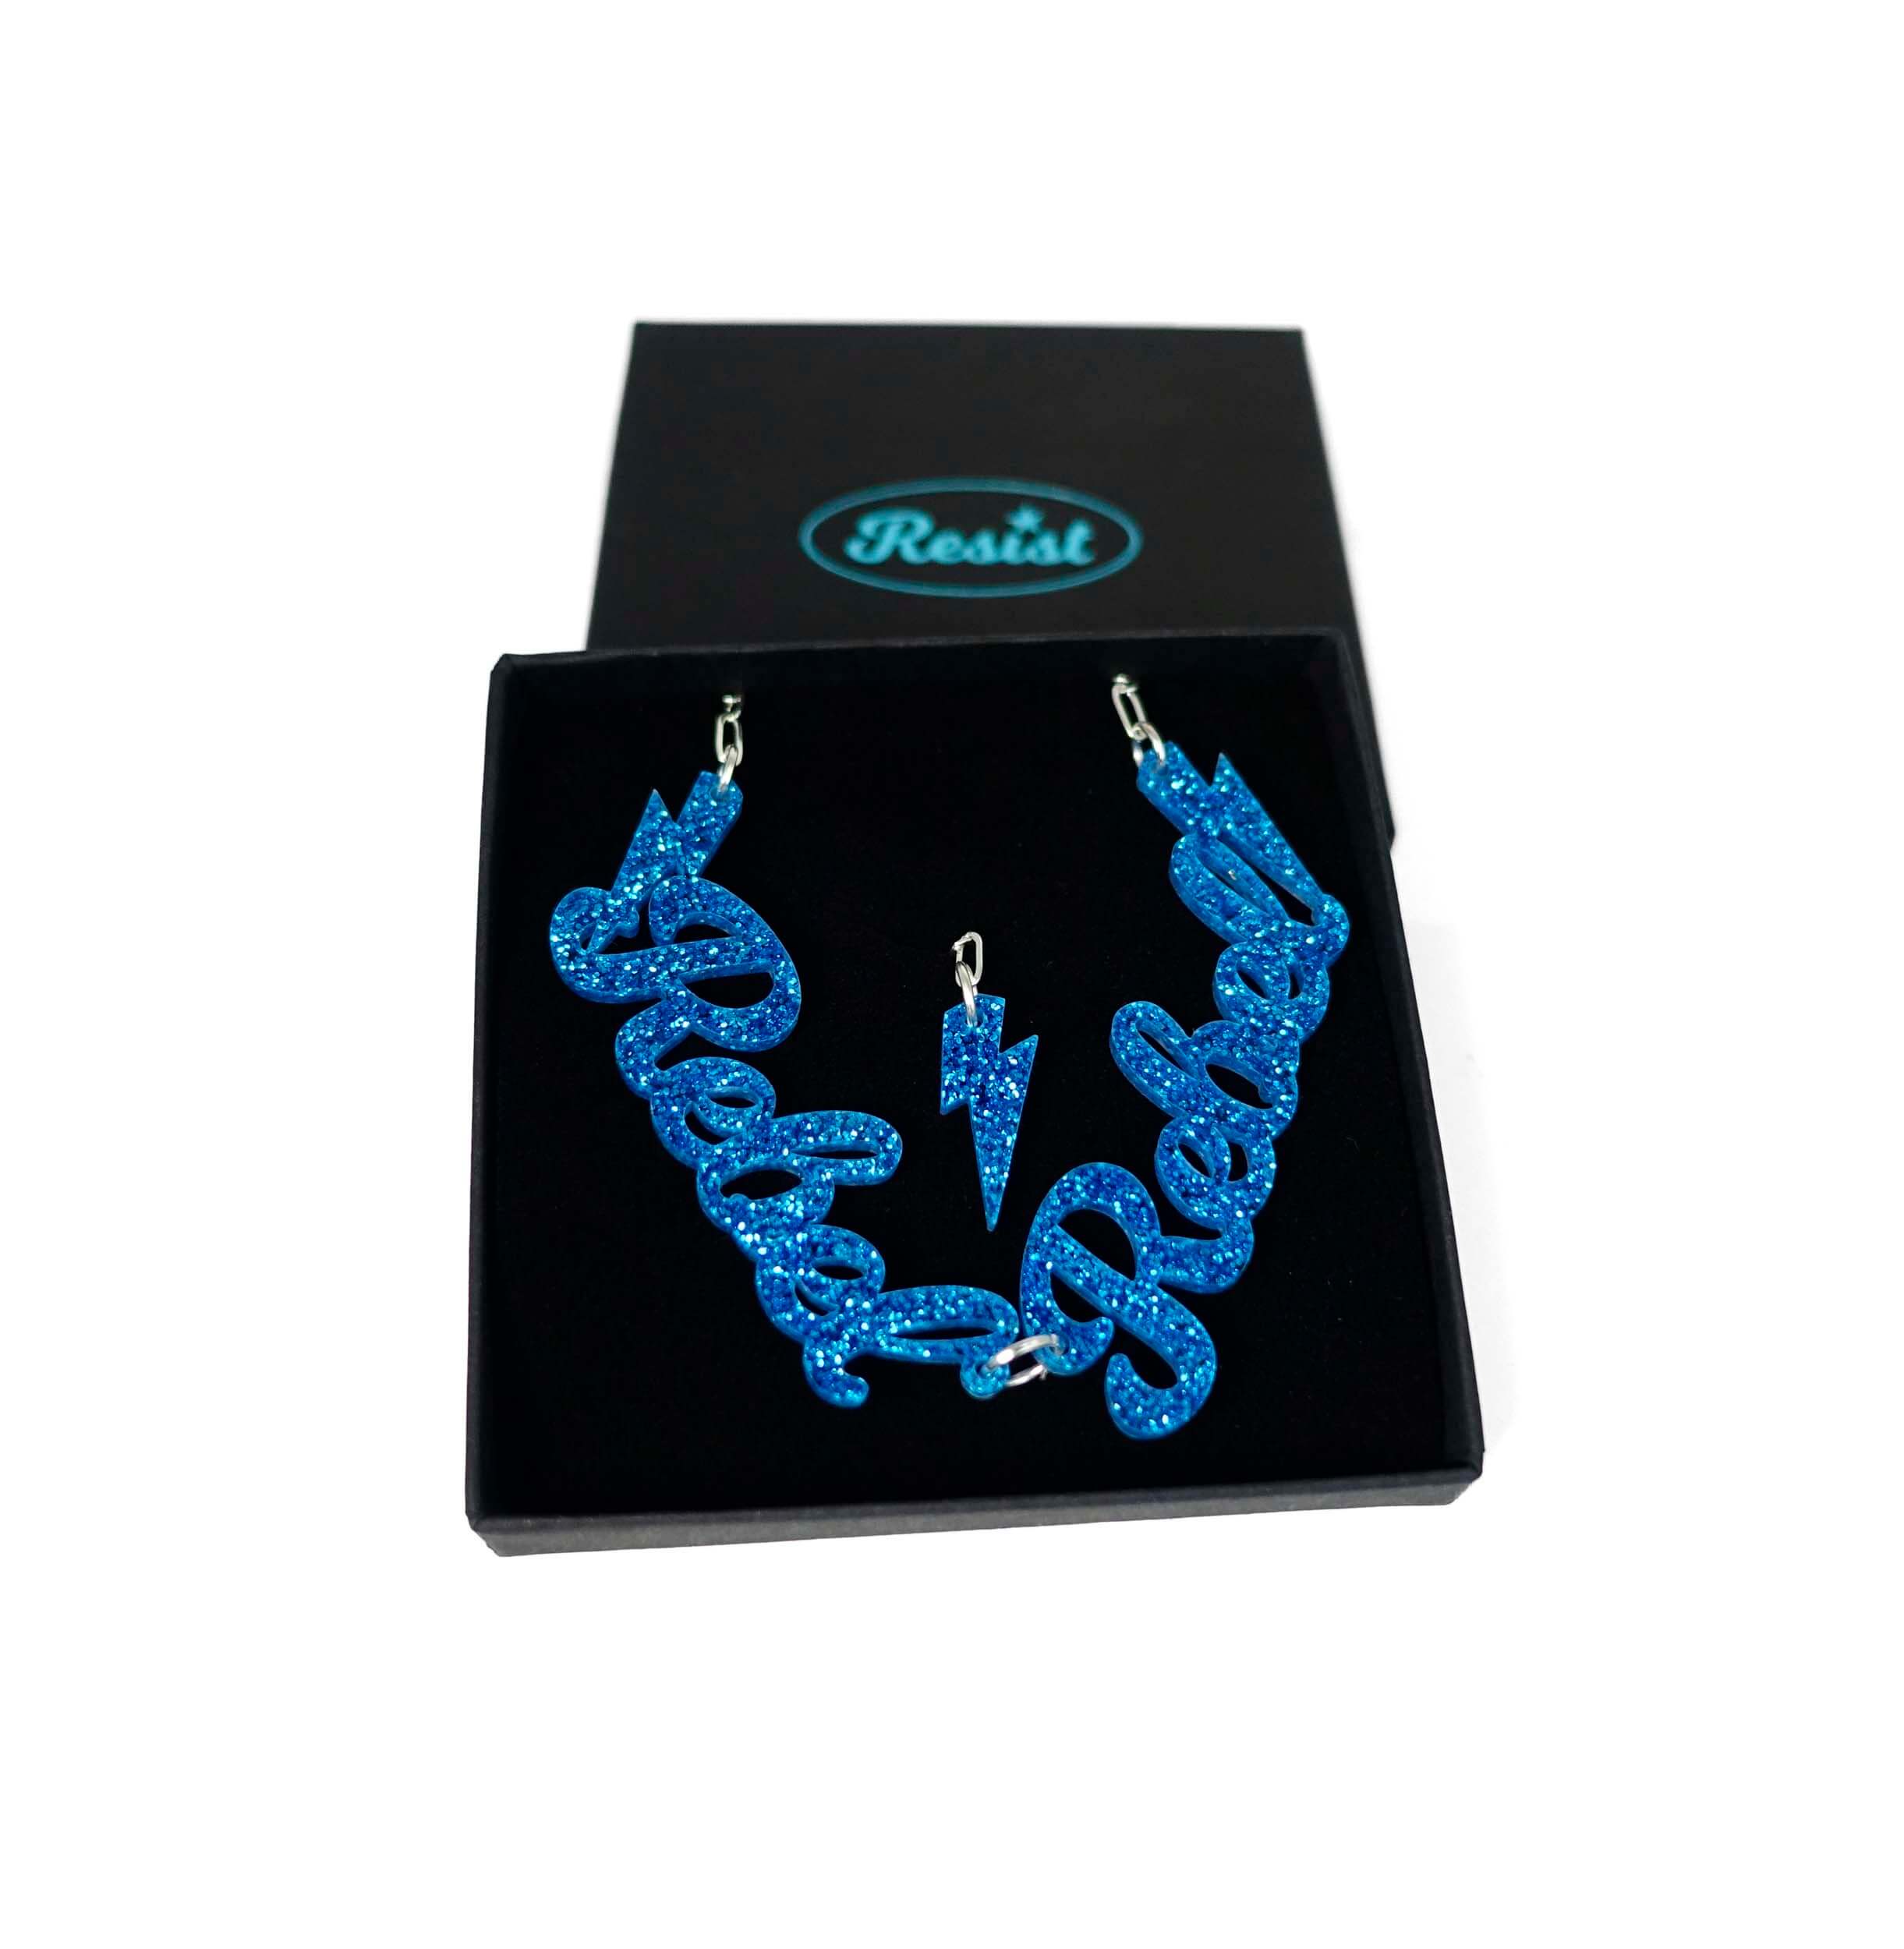 Blue glitter Rebel Rebel necklace shown in a Wear and Resist gift box. 